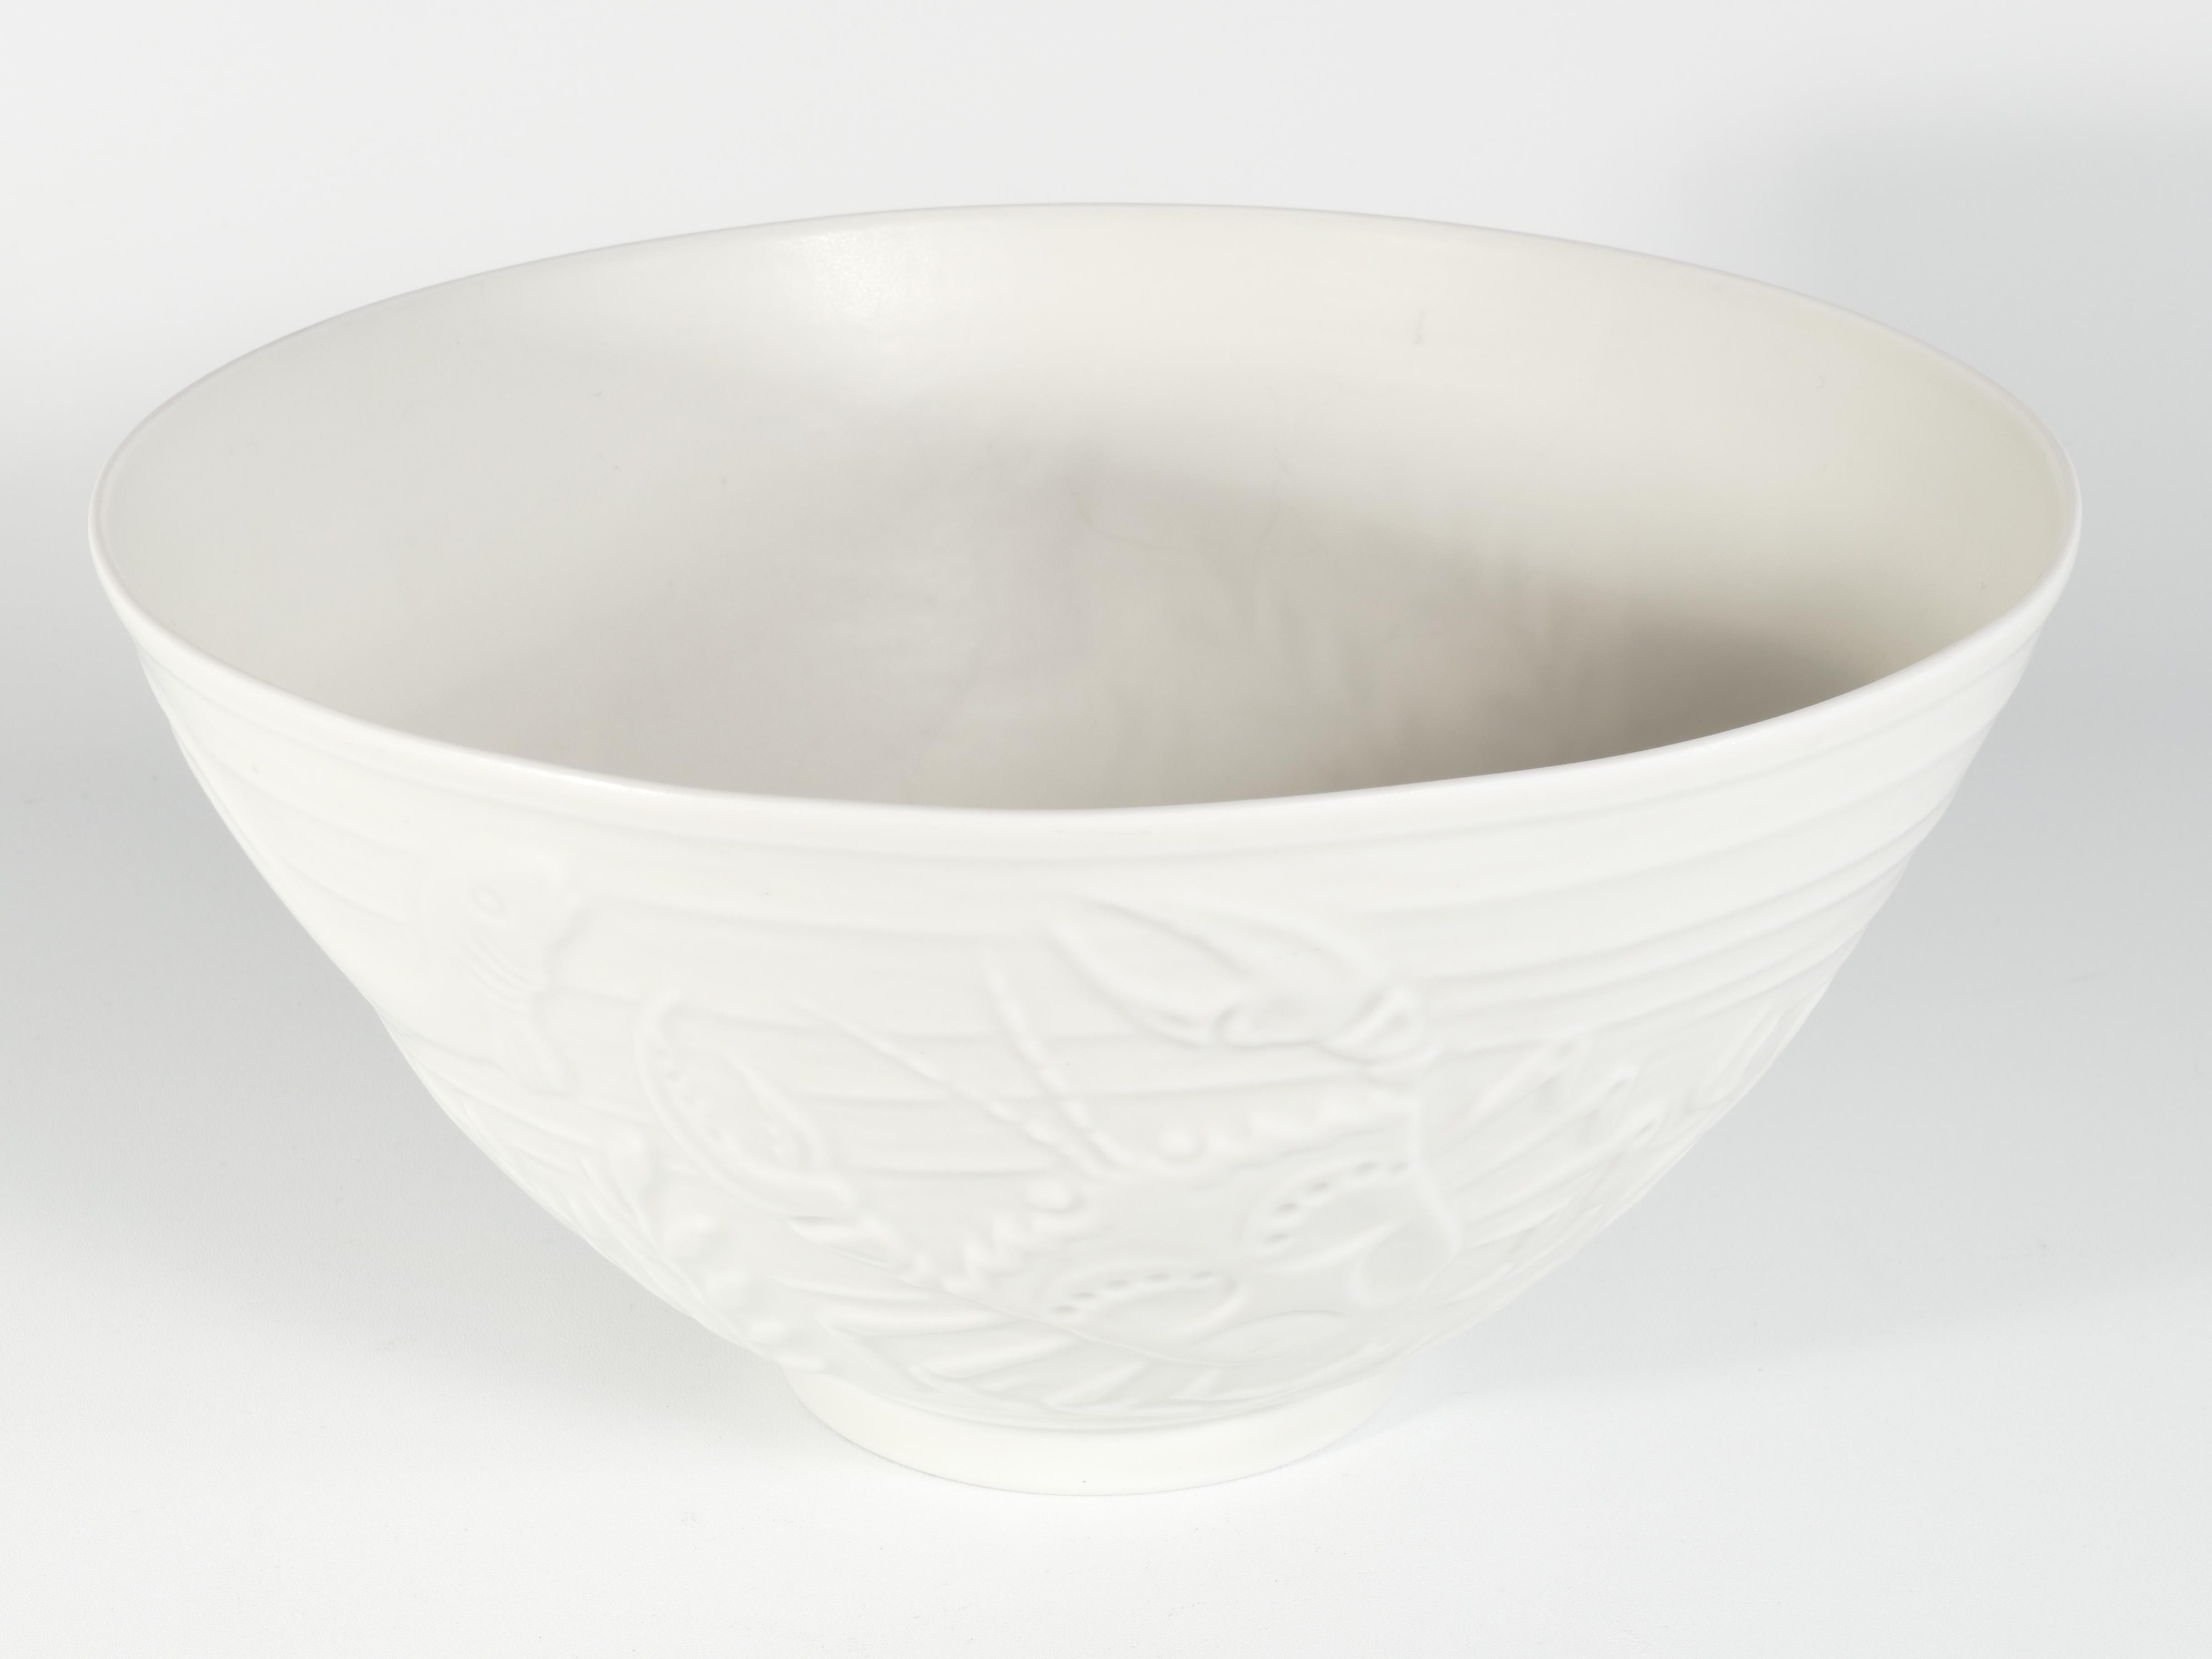 Swedish Grace White Porcelain Sea Themed  Bowl by Gunnar Nylund for ALP, 1940's For Sale 4